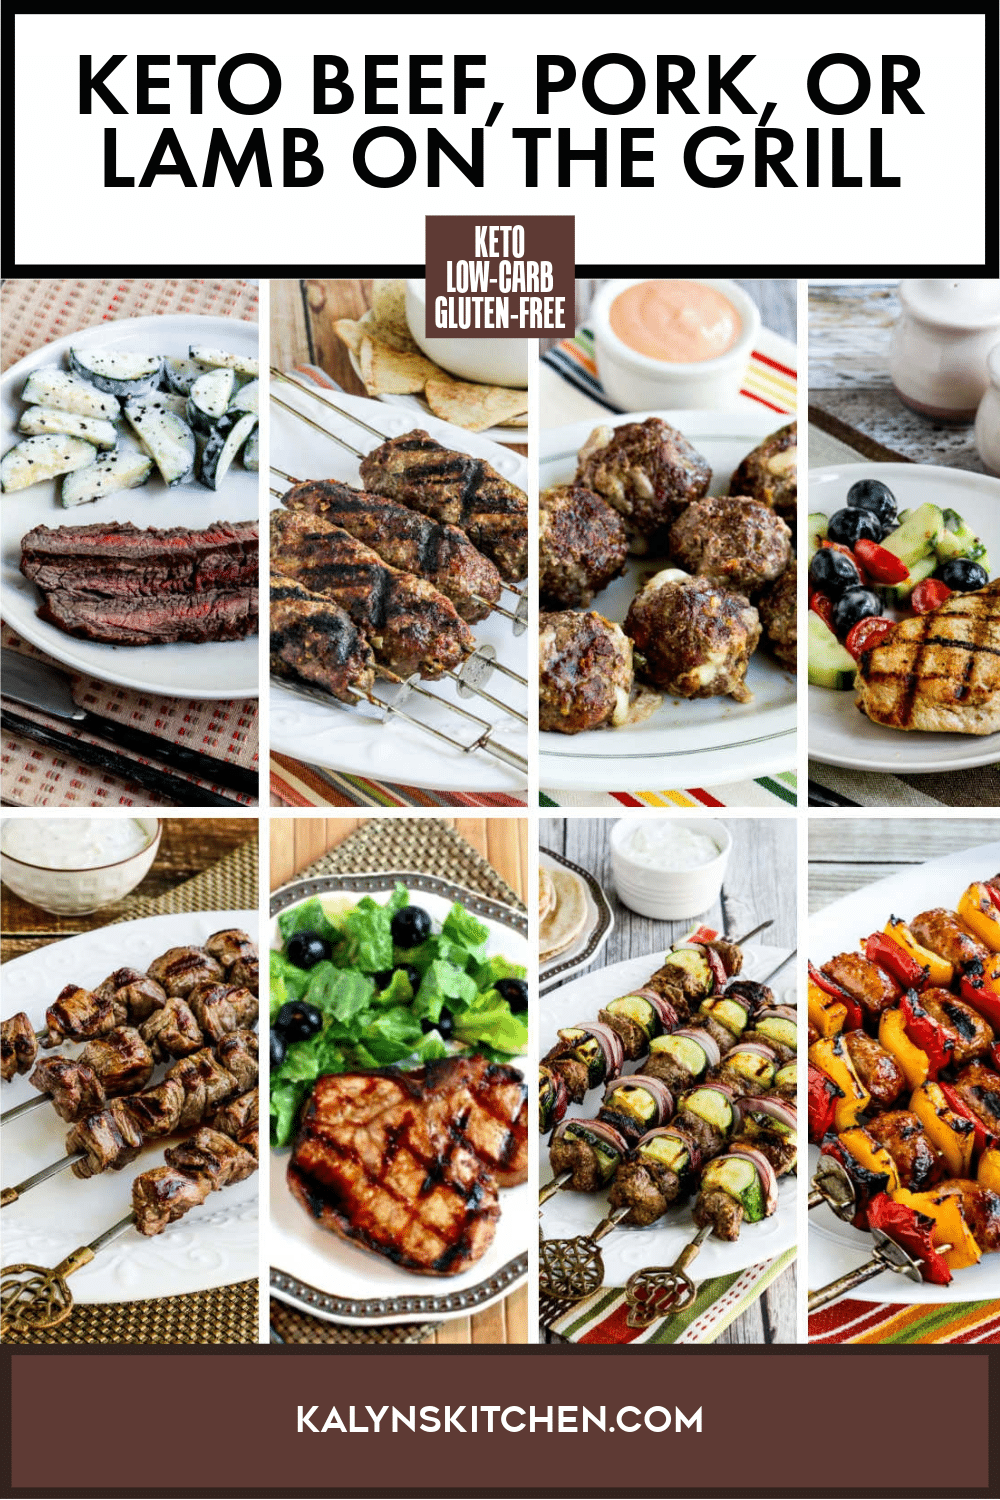 Pinterest image of Keto Beef, Pork, or Lamb On the Grill